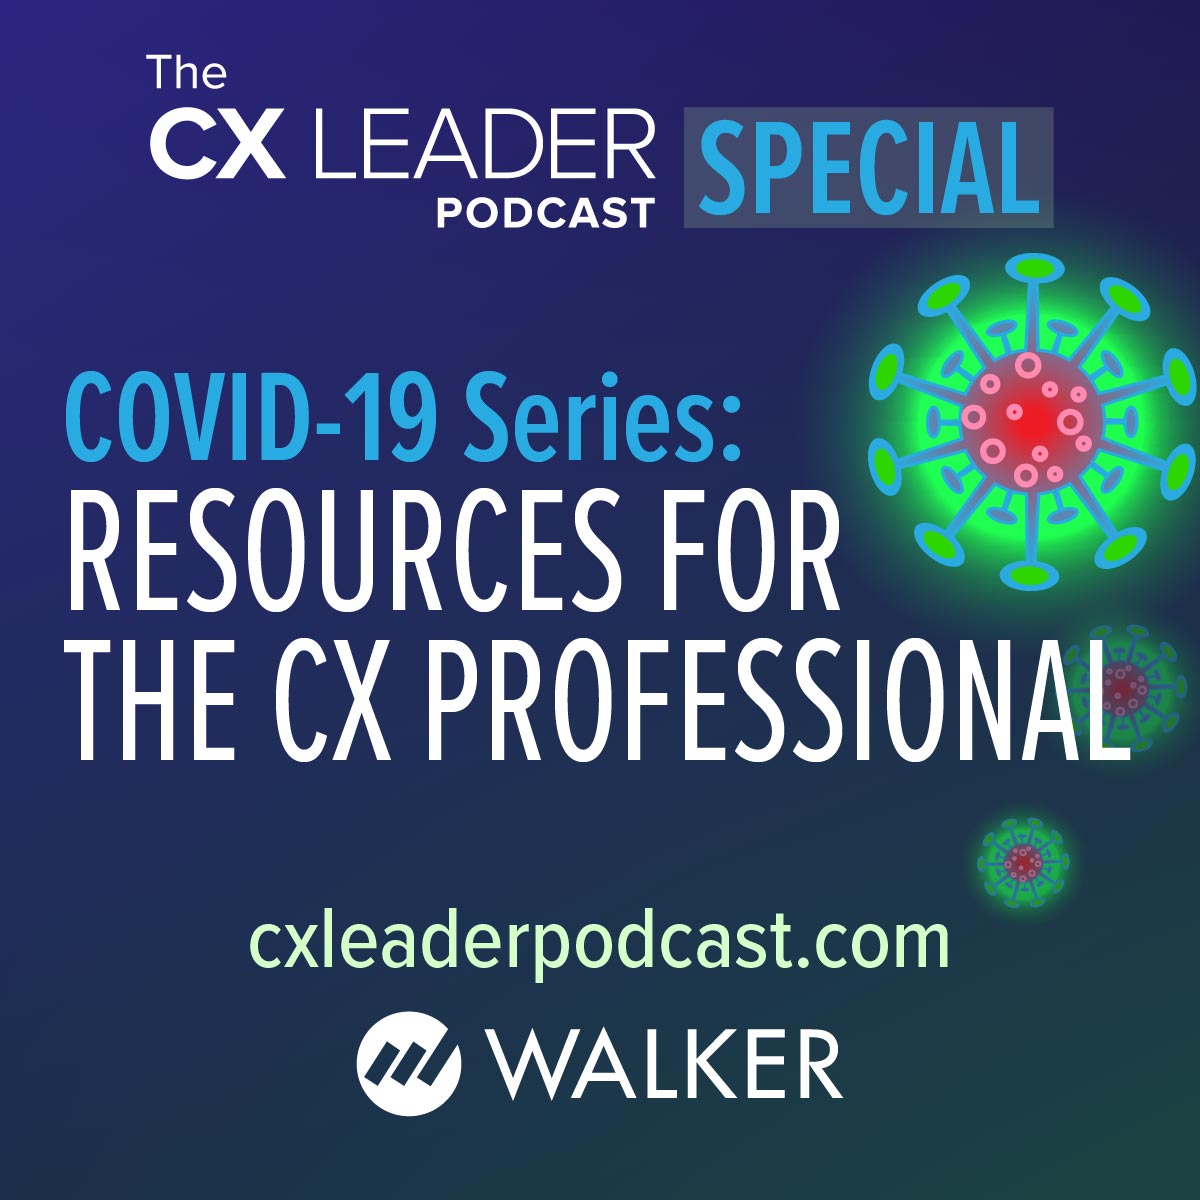 COVID-19 Series: Resources for CX Professionals